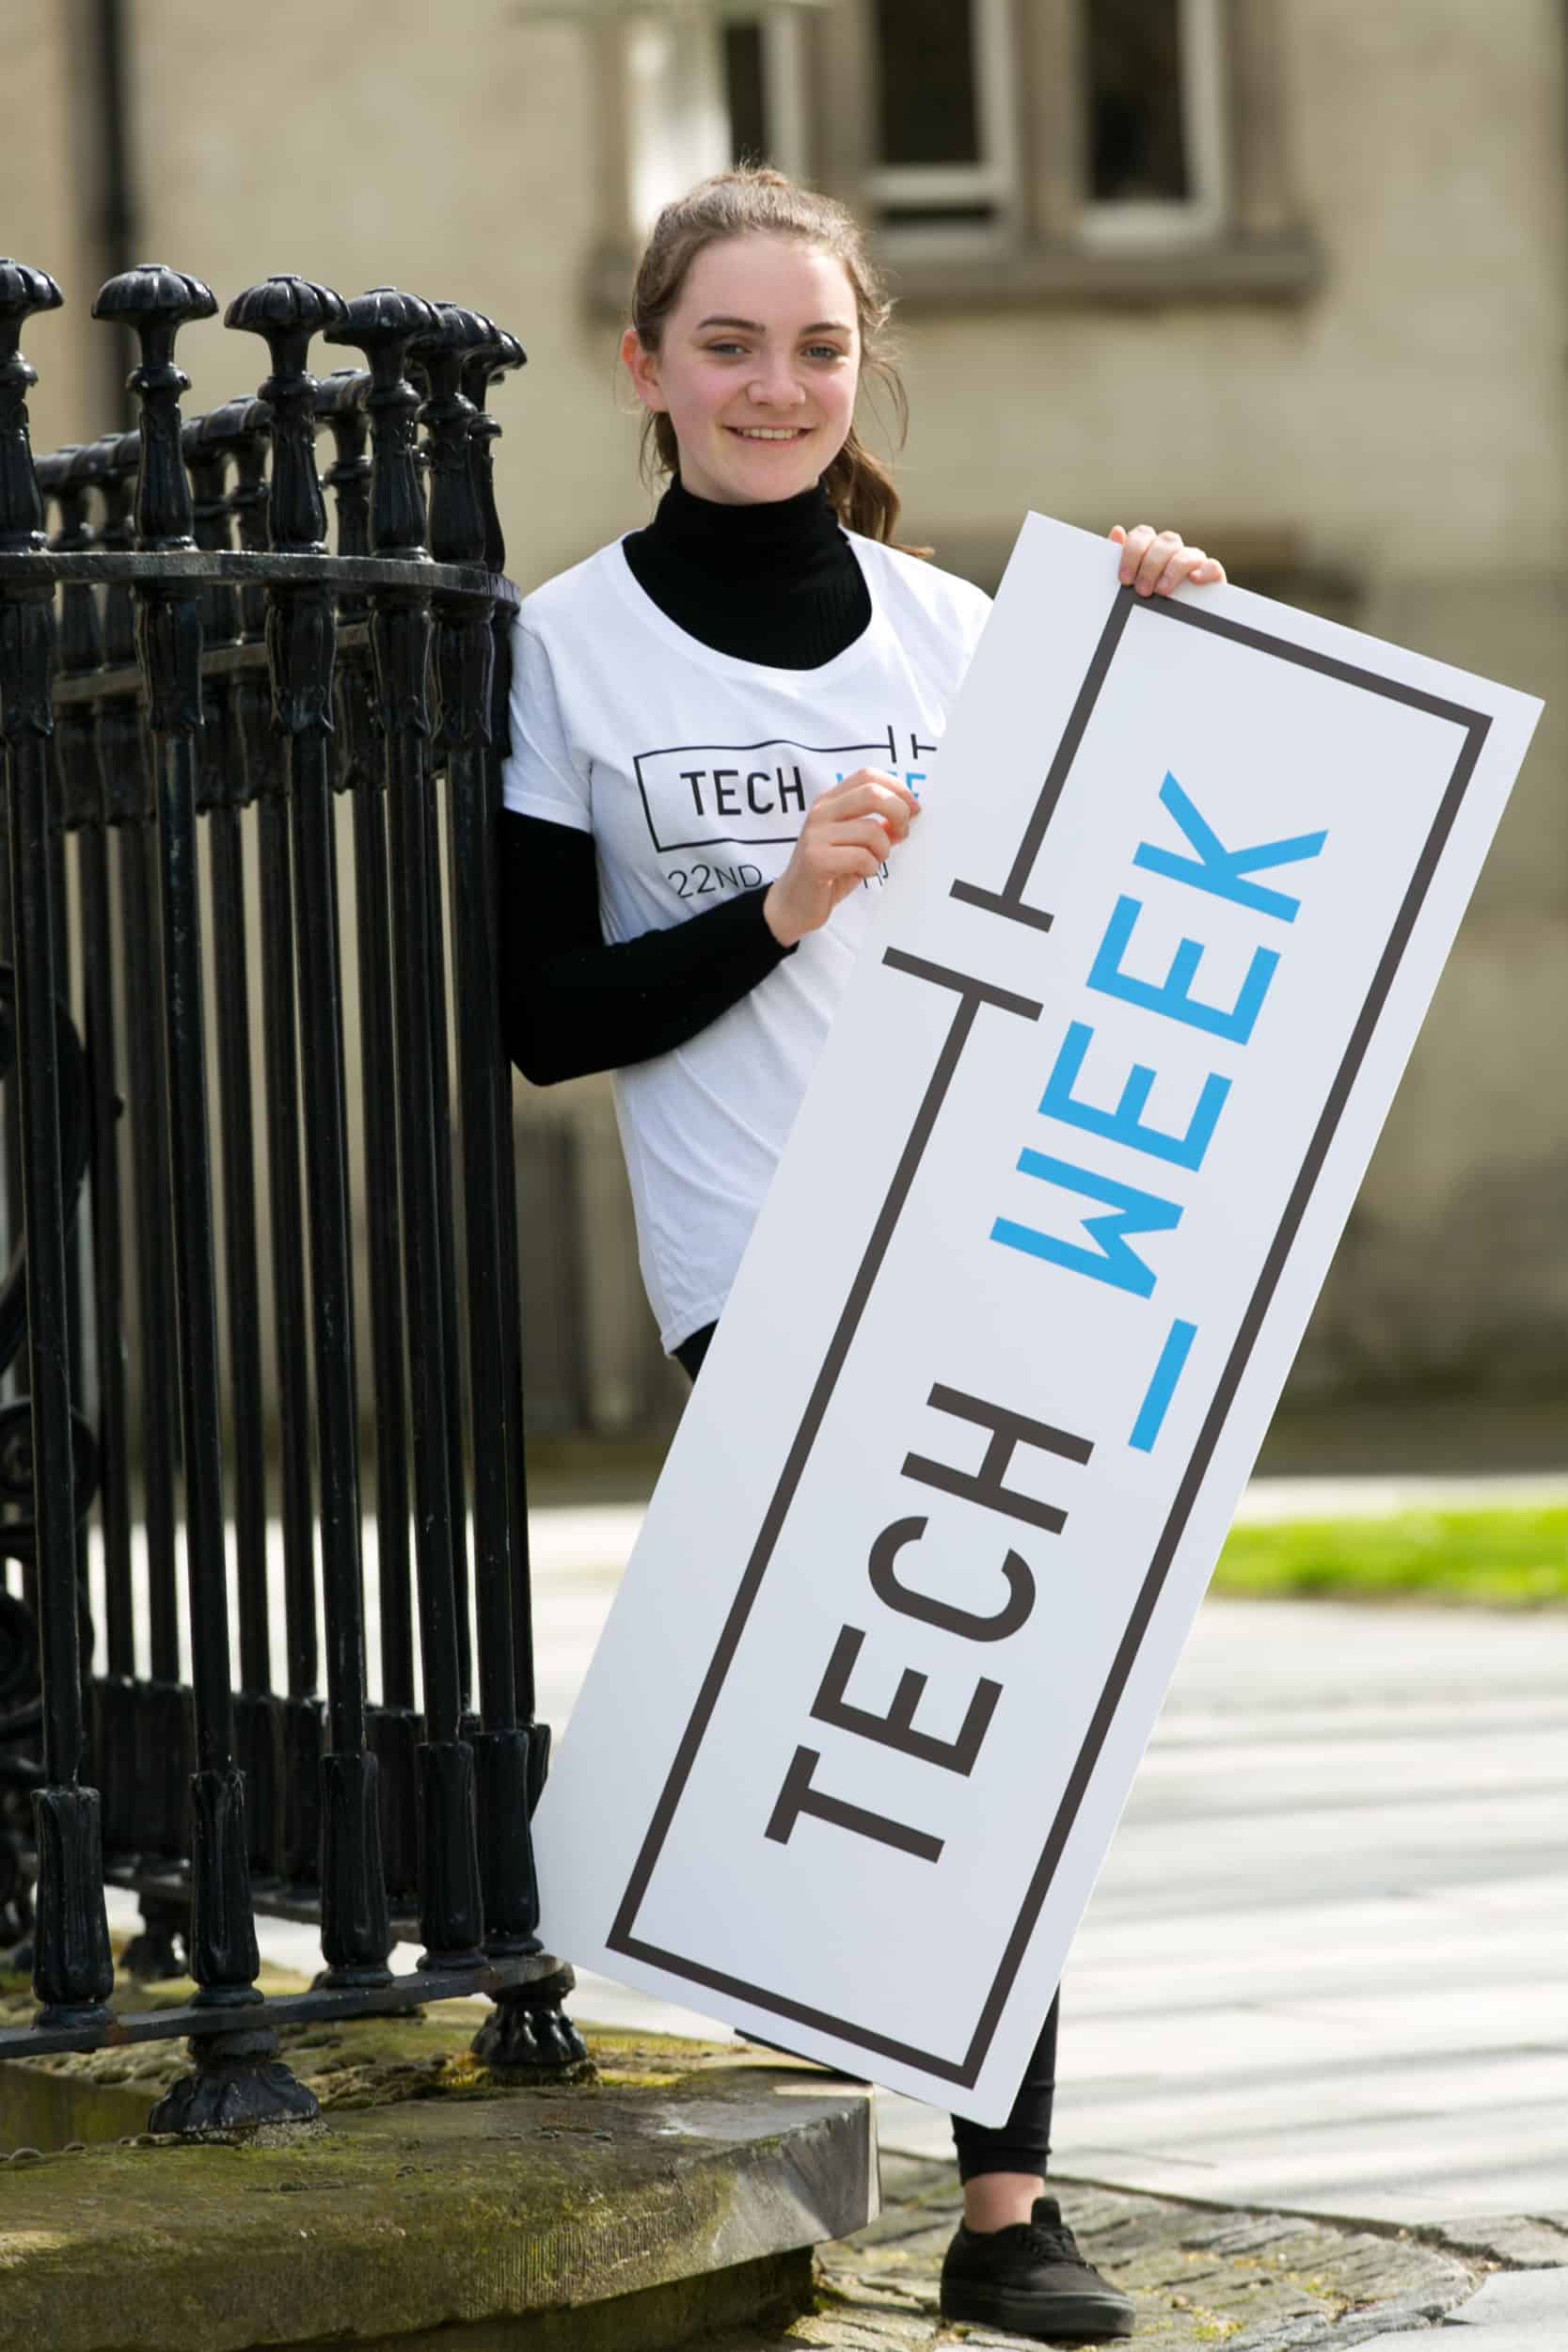 Tech Week to go ahead with a variety of online events and activities